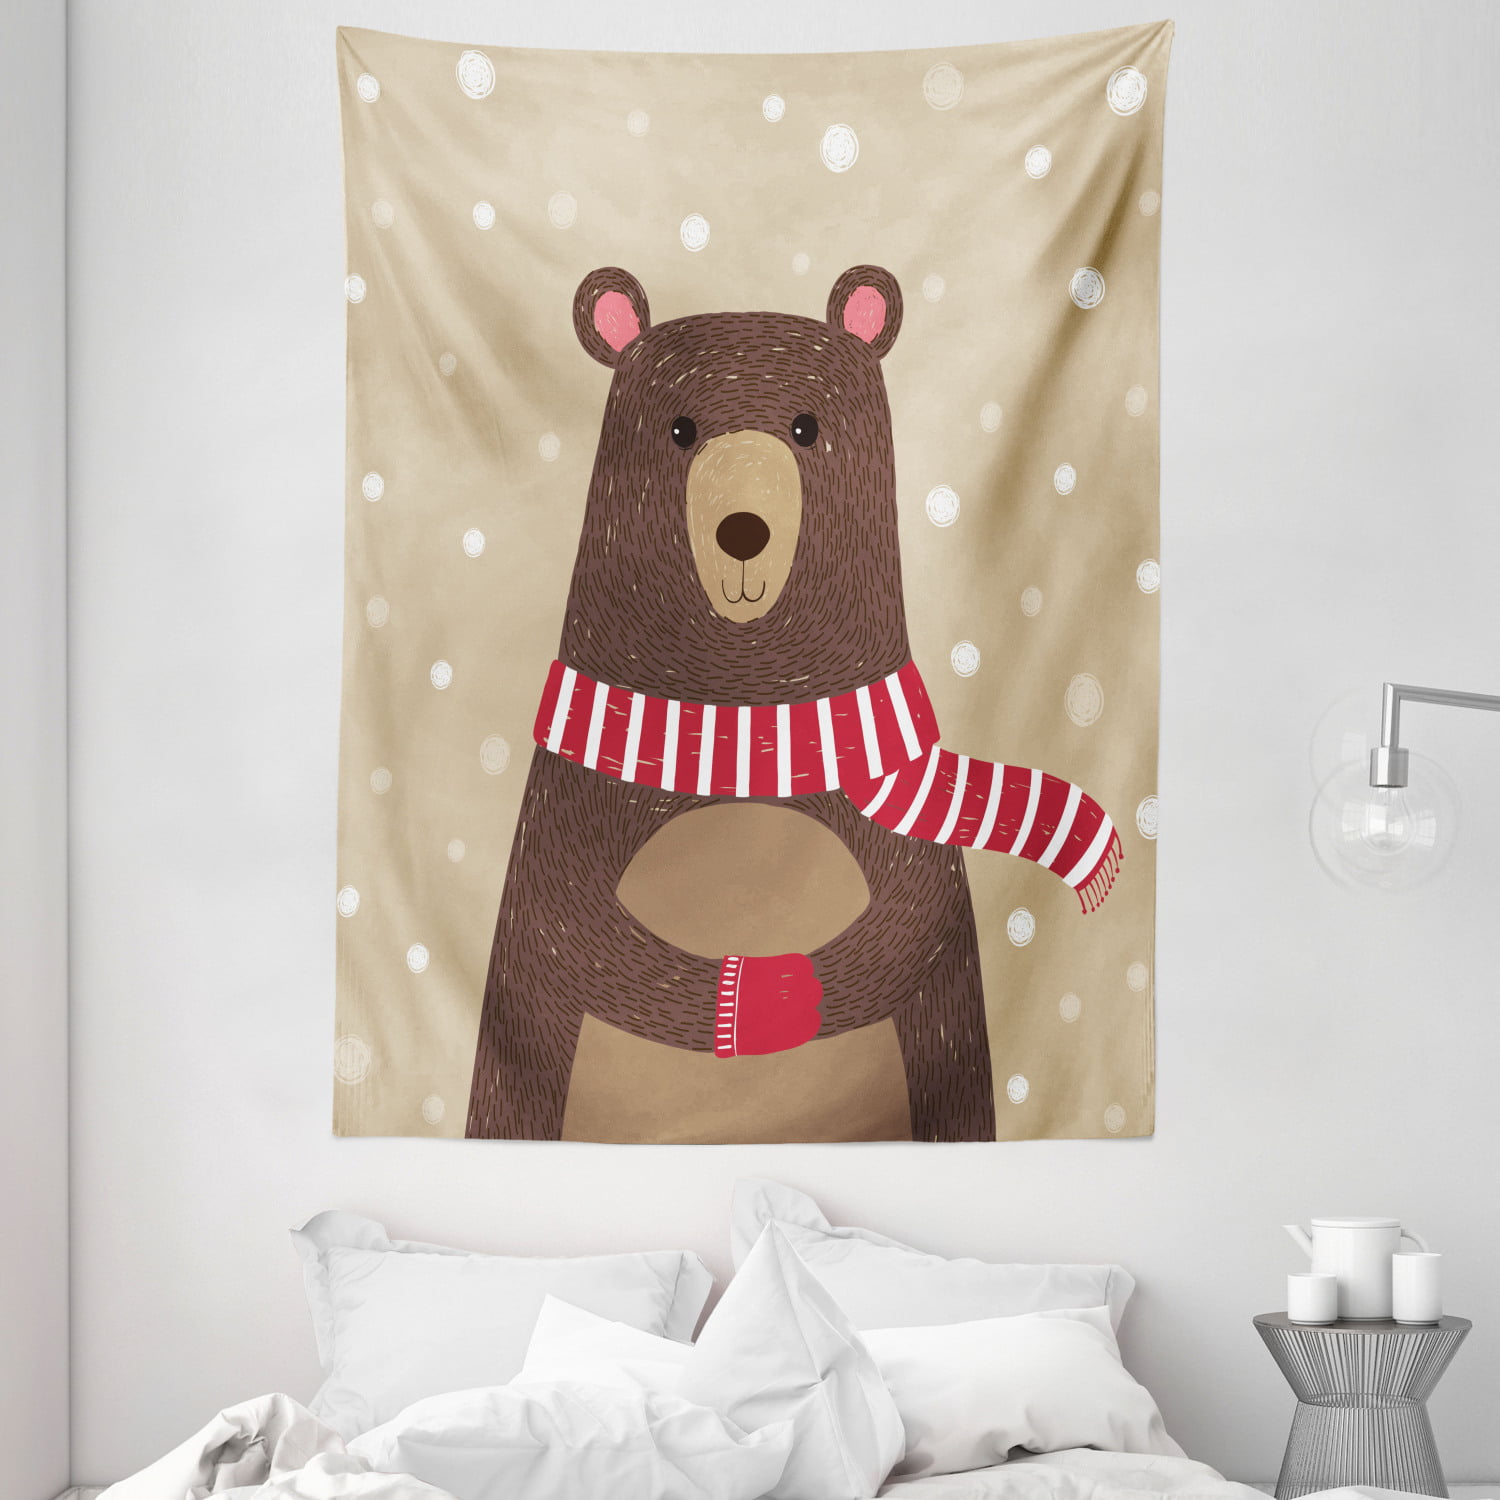 8 x 12 Carolines Treasures Teddy Bear on The Beach Wall or Door Hanging Prints APH0088DS812 Multicolor